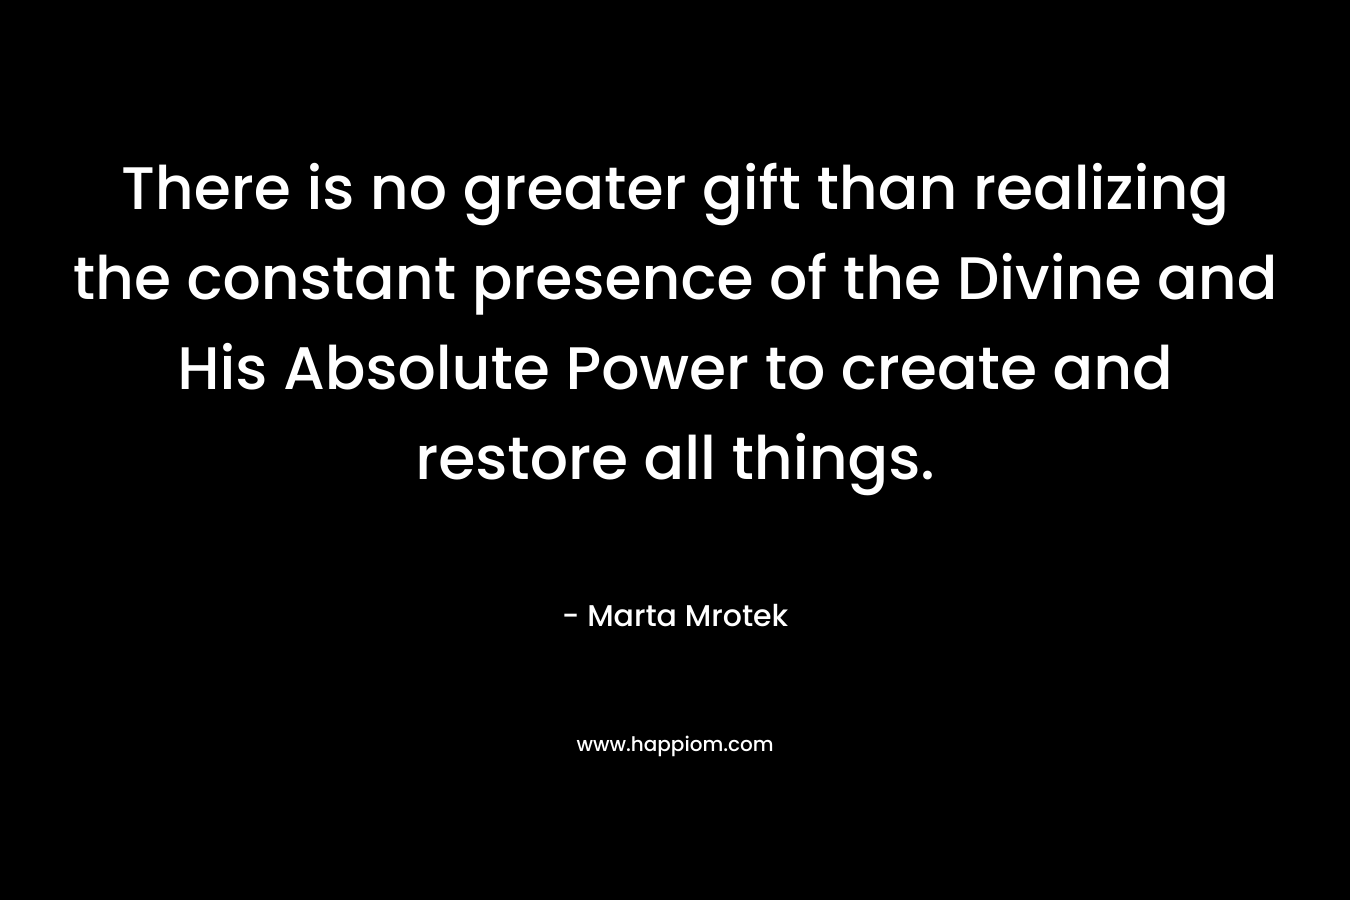 There is no greater gift than realizing the constant presence of the Divine and His Absolute Power to create and restore all things.